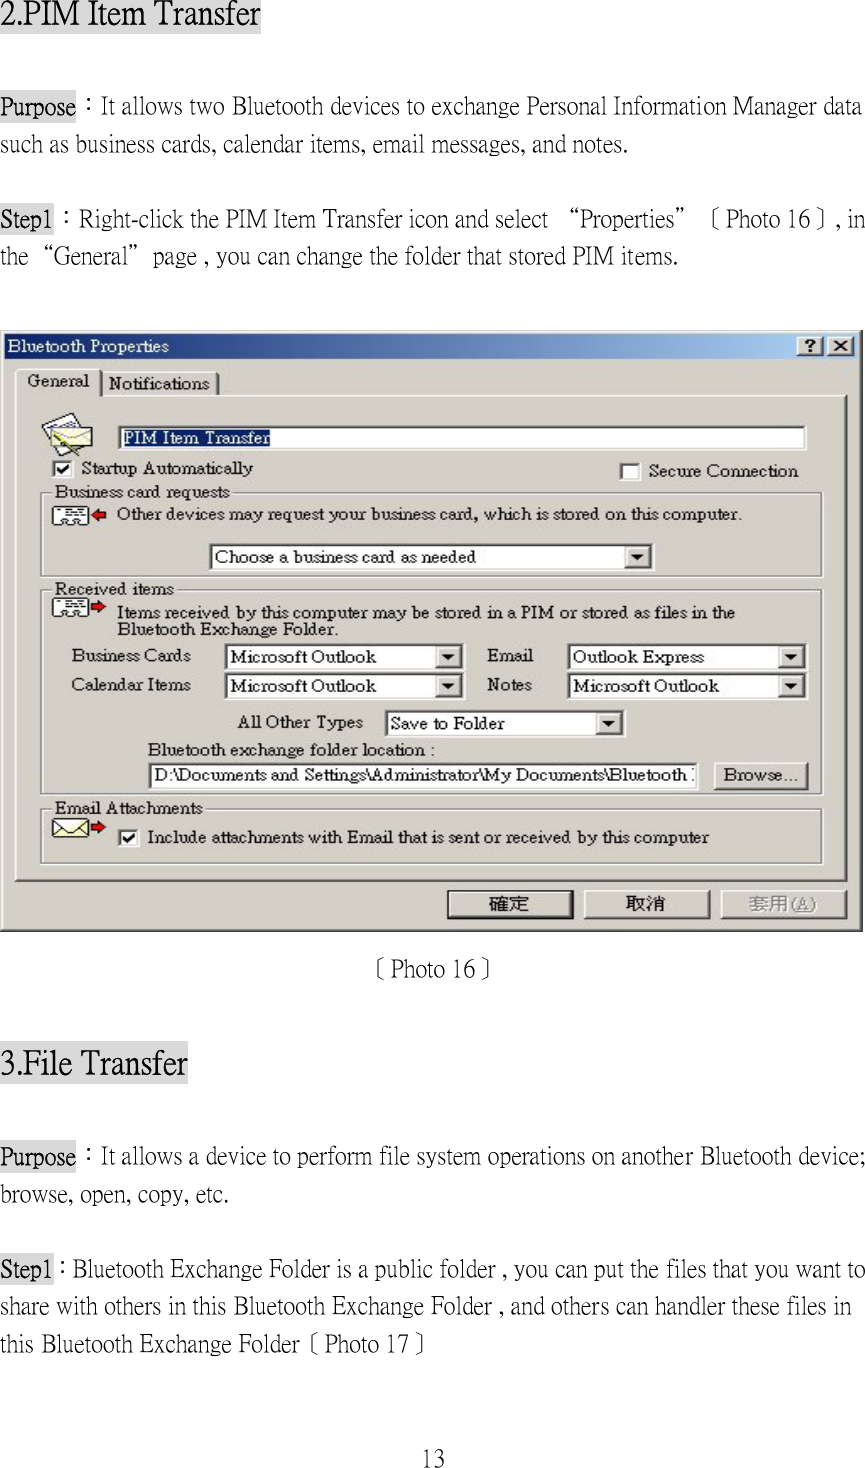 13 2.PIM Item Transfer  Purpose：It allows two Bluetooth devices to exchange Personal Information Manager data such as business cards, calendar items, email messages, and notes.  Step1：Right-click the PIM Item Transfer icon and select “Properties”〔Photo 16〕, in the“General”page , you can change the folder that stored PIM items.   〔Photo 16〕  3.File Transfer  Purpose：It allows a device to perform file system operations on another Bluetooth device; browse, open, copy, etc.  Step1：Bluetooth Exchange Folder is a public folder , you can put the files that you want to share with others in this Bluetooth Exchange Folder , and others can handler these files in this Bluetooth Exchange Folder〔Photo 17〕 